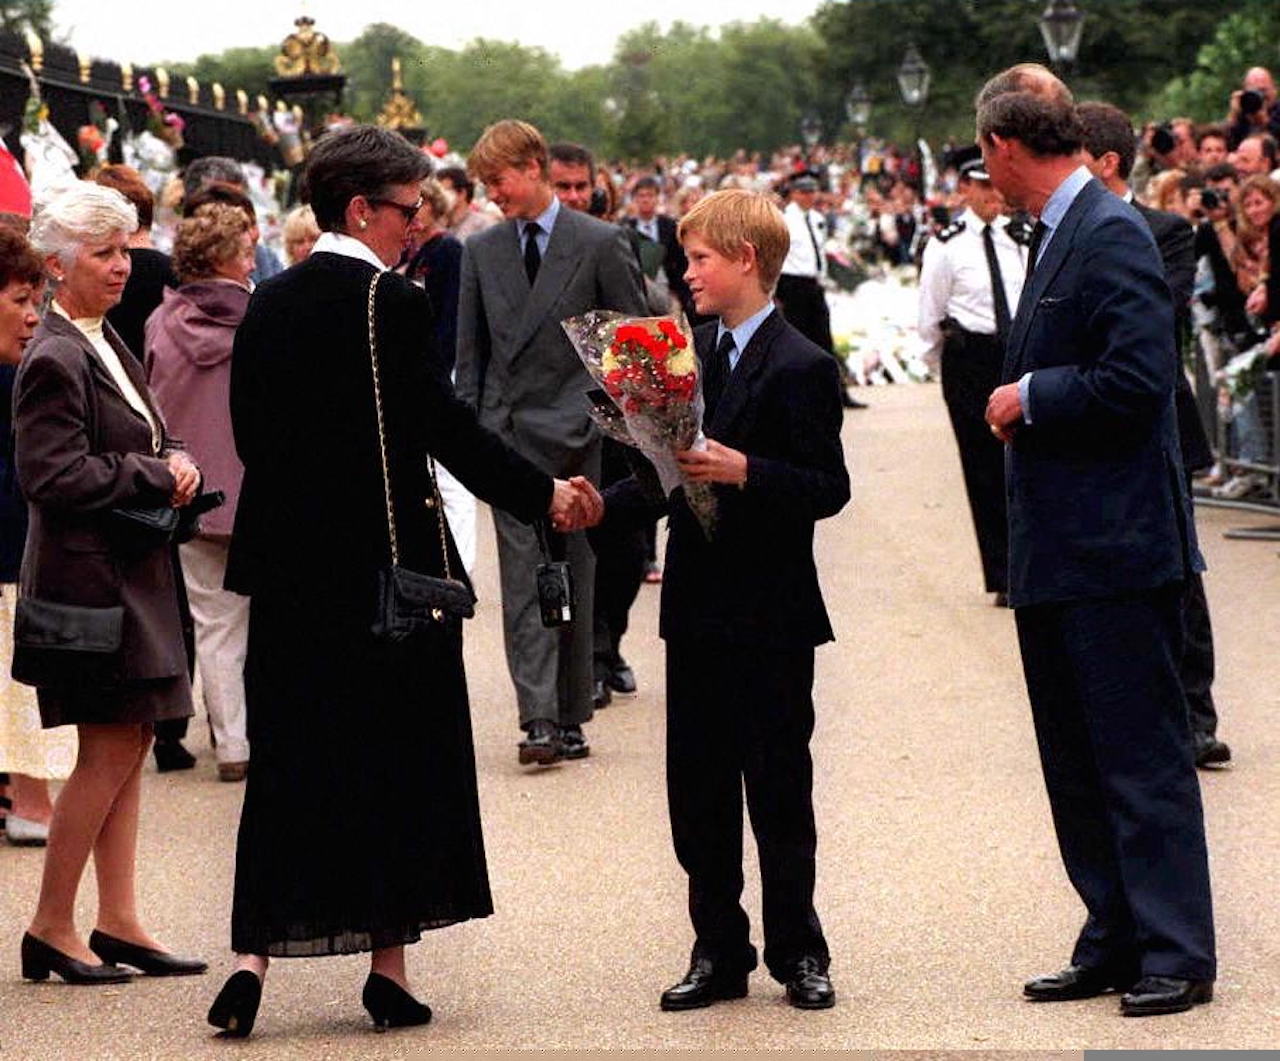 The future King Charles (R) and his sons Prince William (C background) and Prince Harry (C front) receive condolences and floral tributes for their mother, Diana, Princess of Wales, from mourners waiting outside Kensington Palace in London,